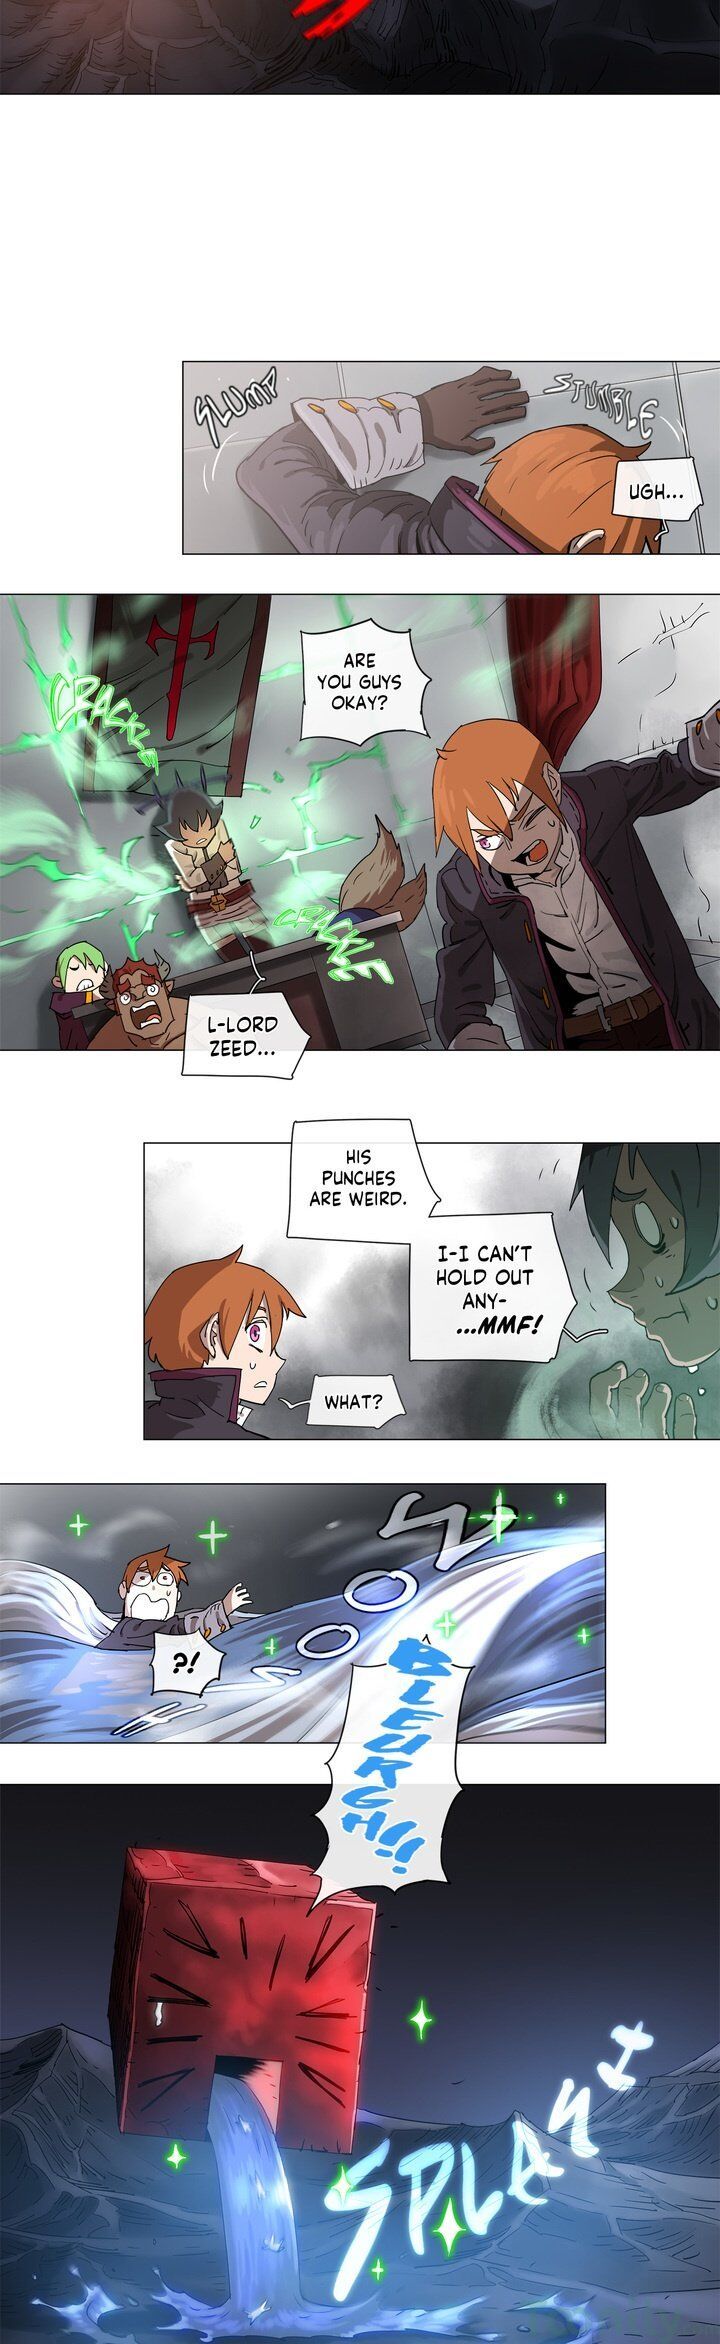 4 Cut Hero Chapter 112 page 4